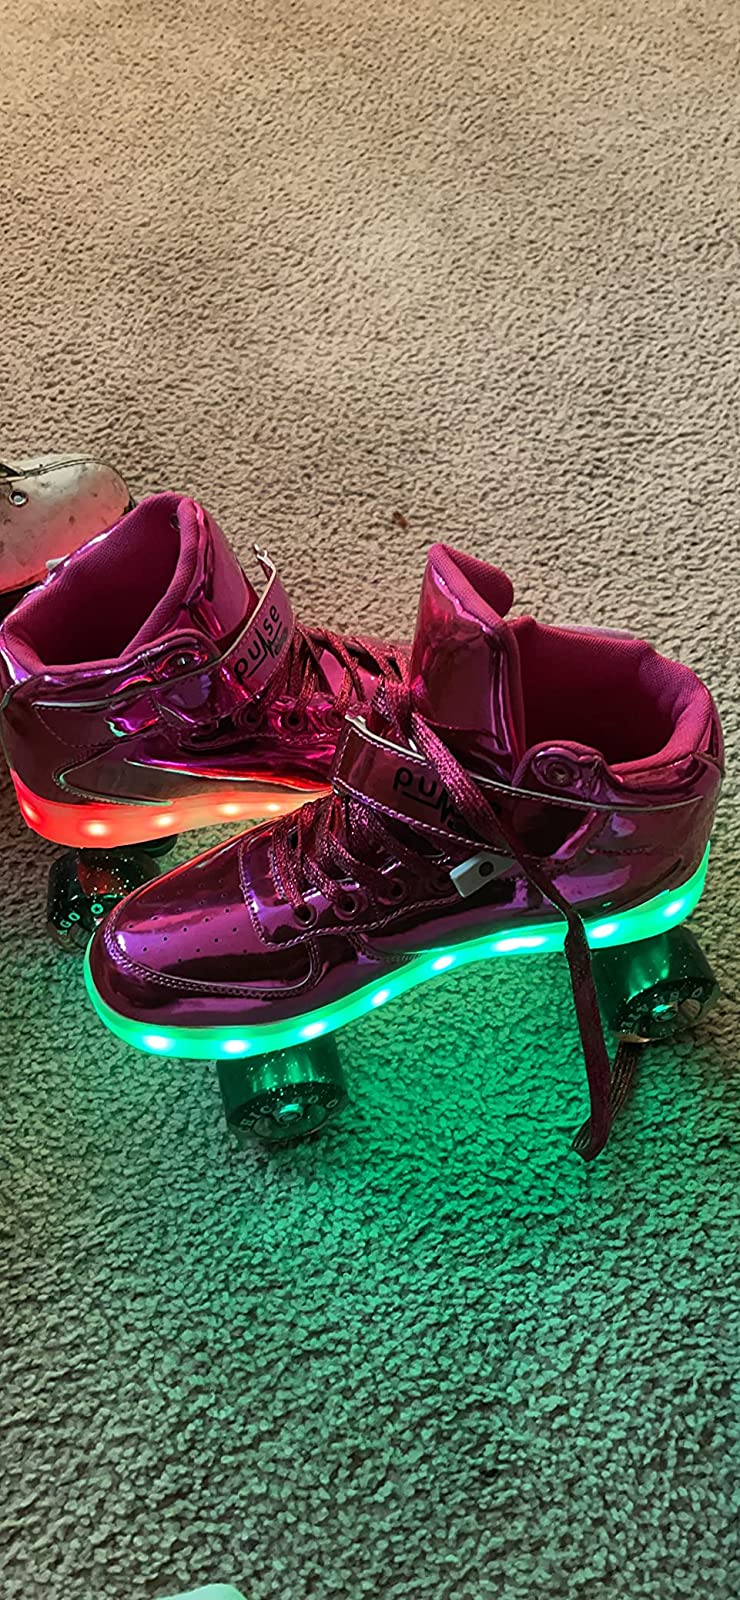 Men's and Women's Roller Skating Shoes, 7 Color Led Sneakers photo review